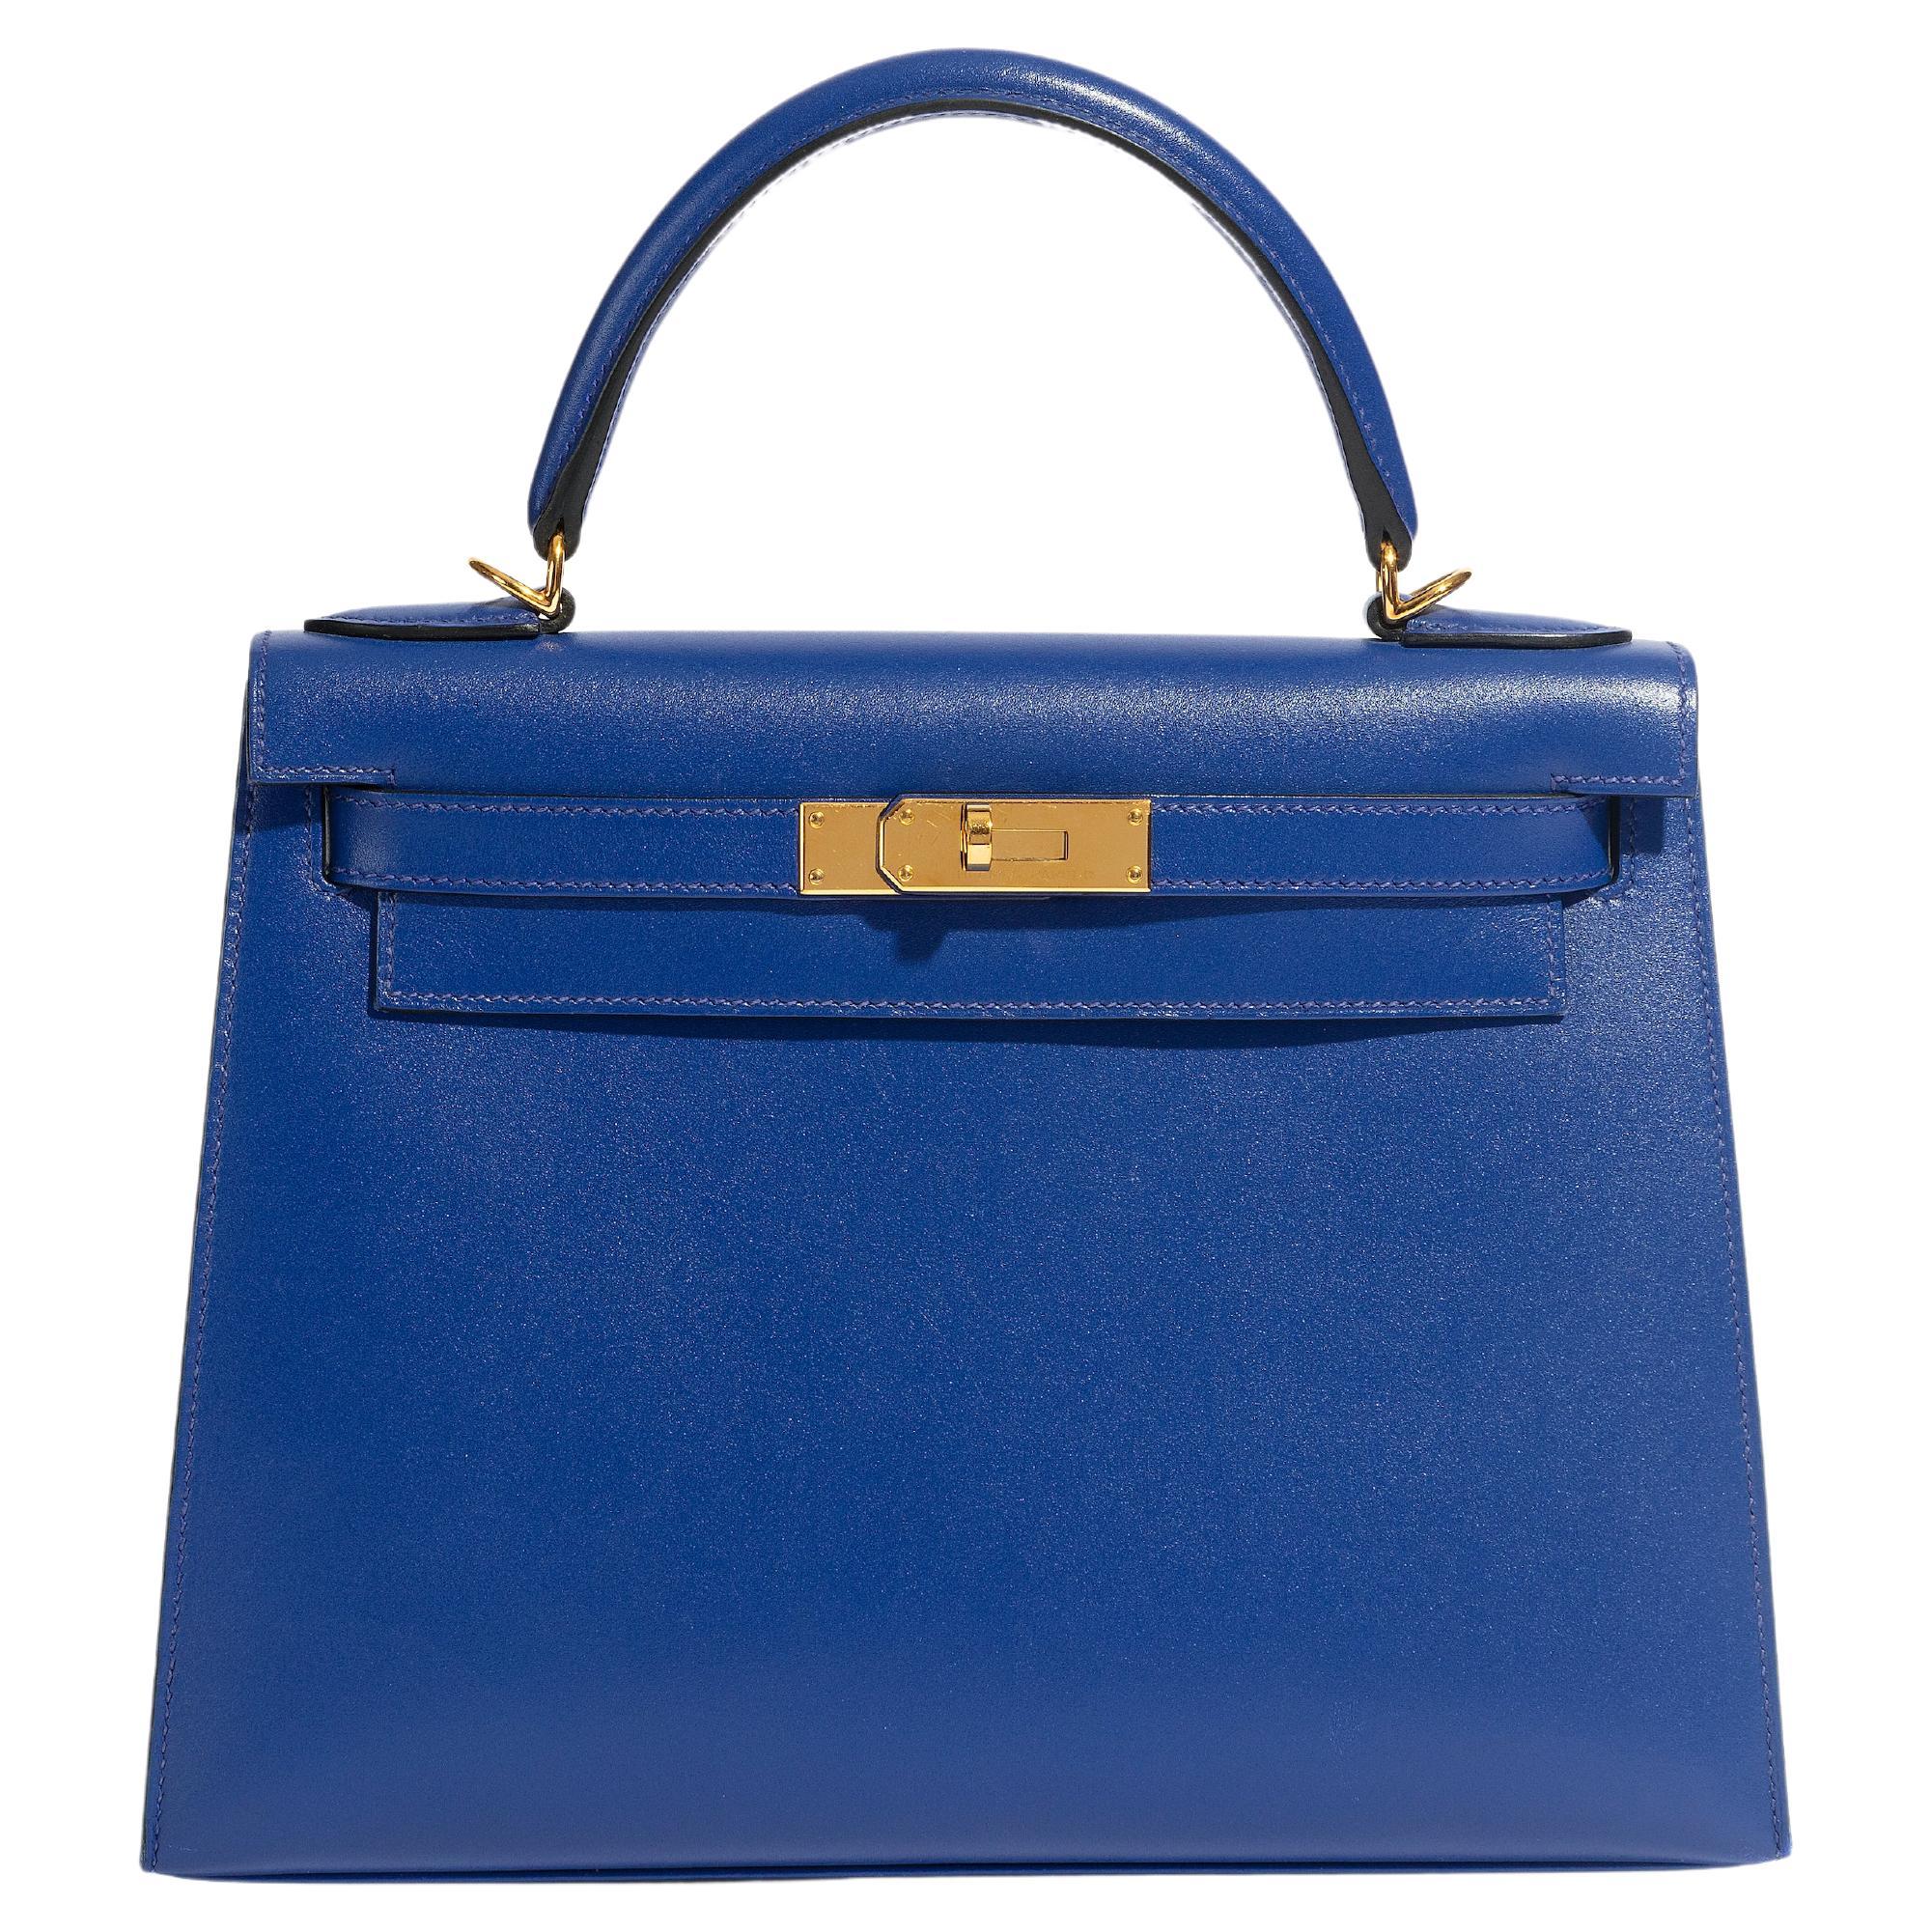 Hermes Limited Edition Kellywood 22 Bag in Wood with Aluminum and